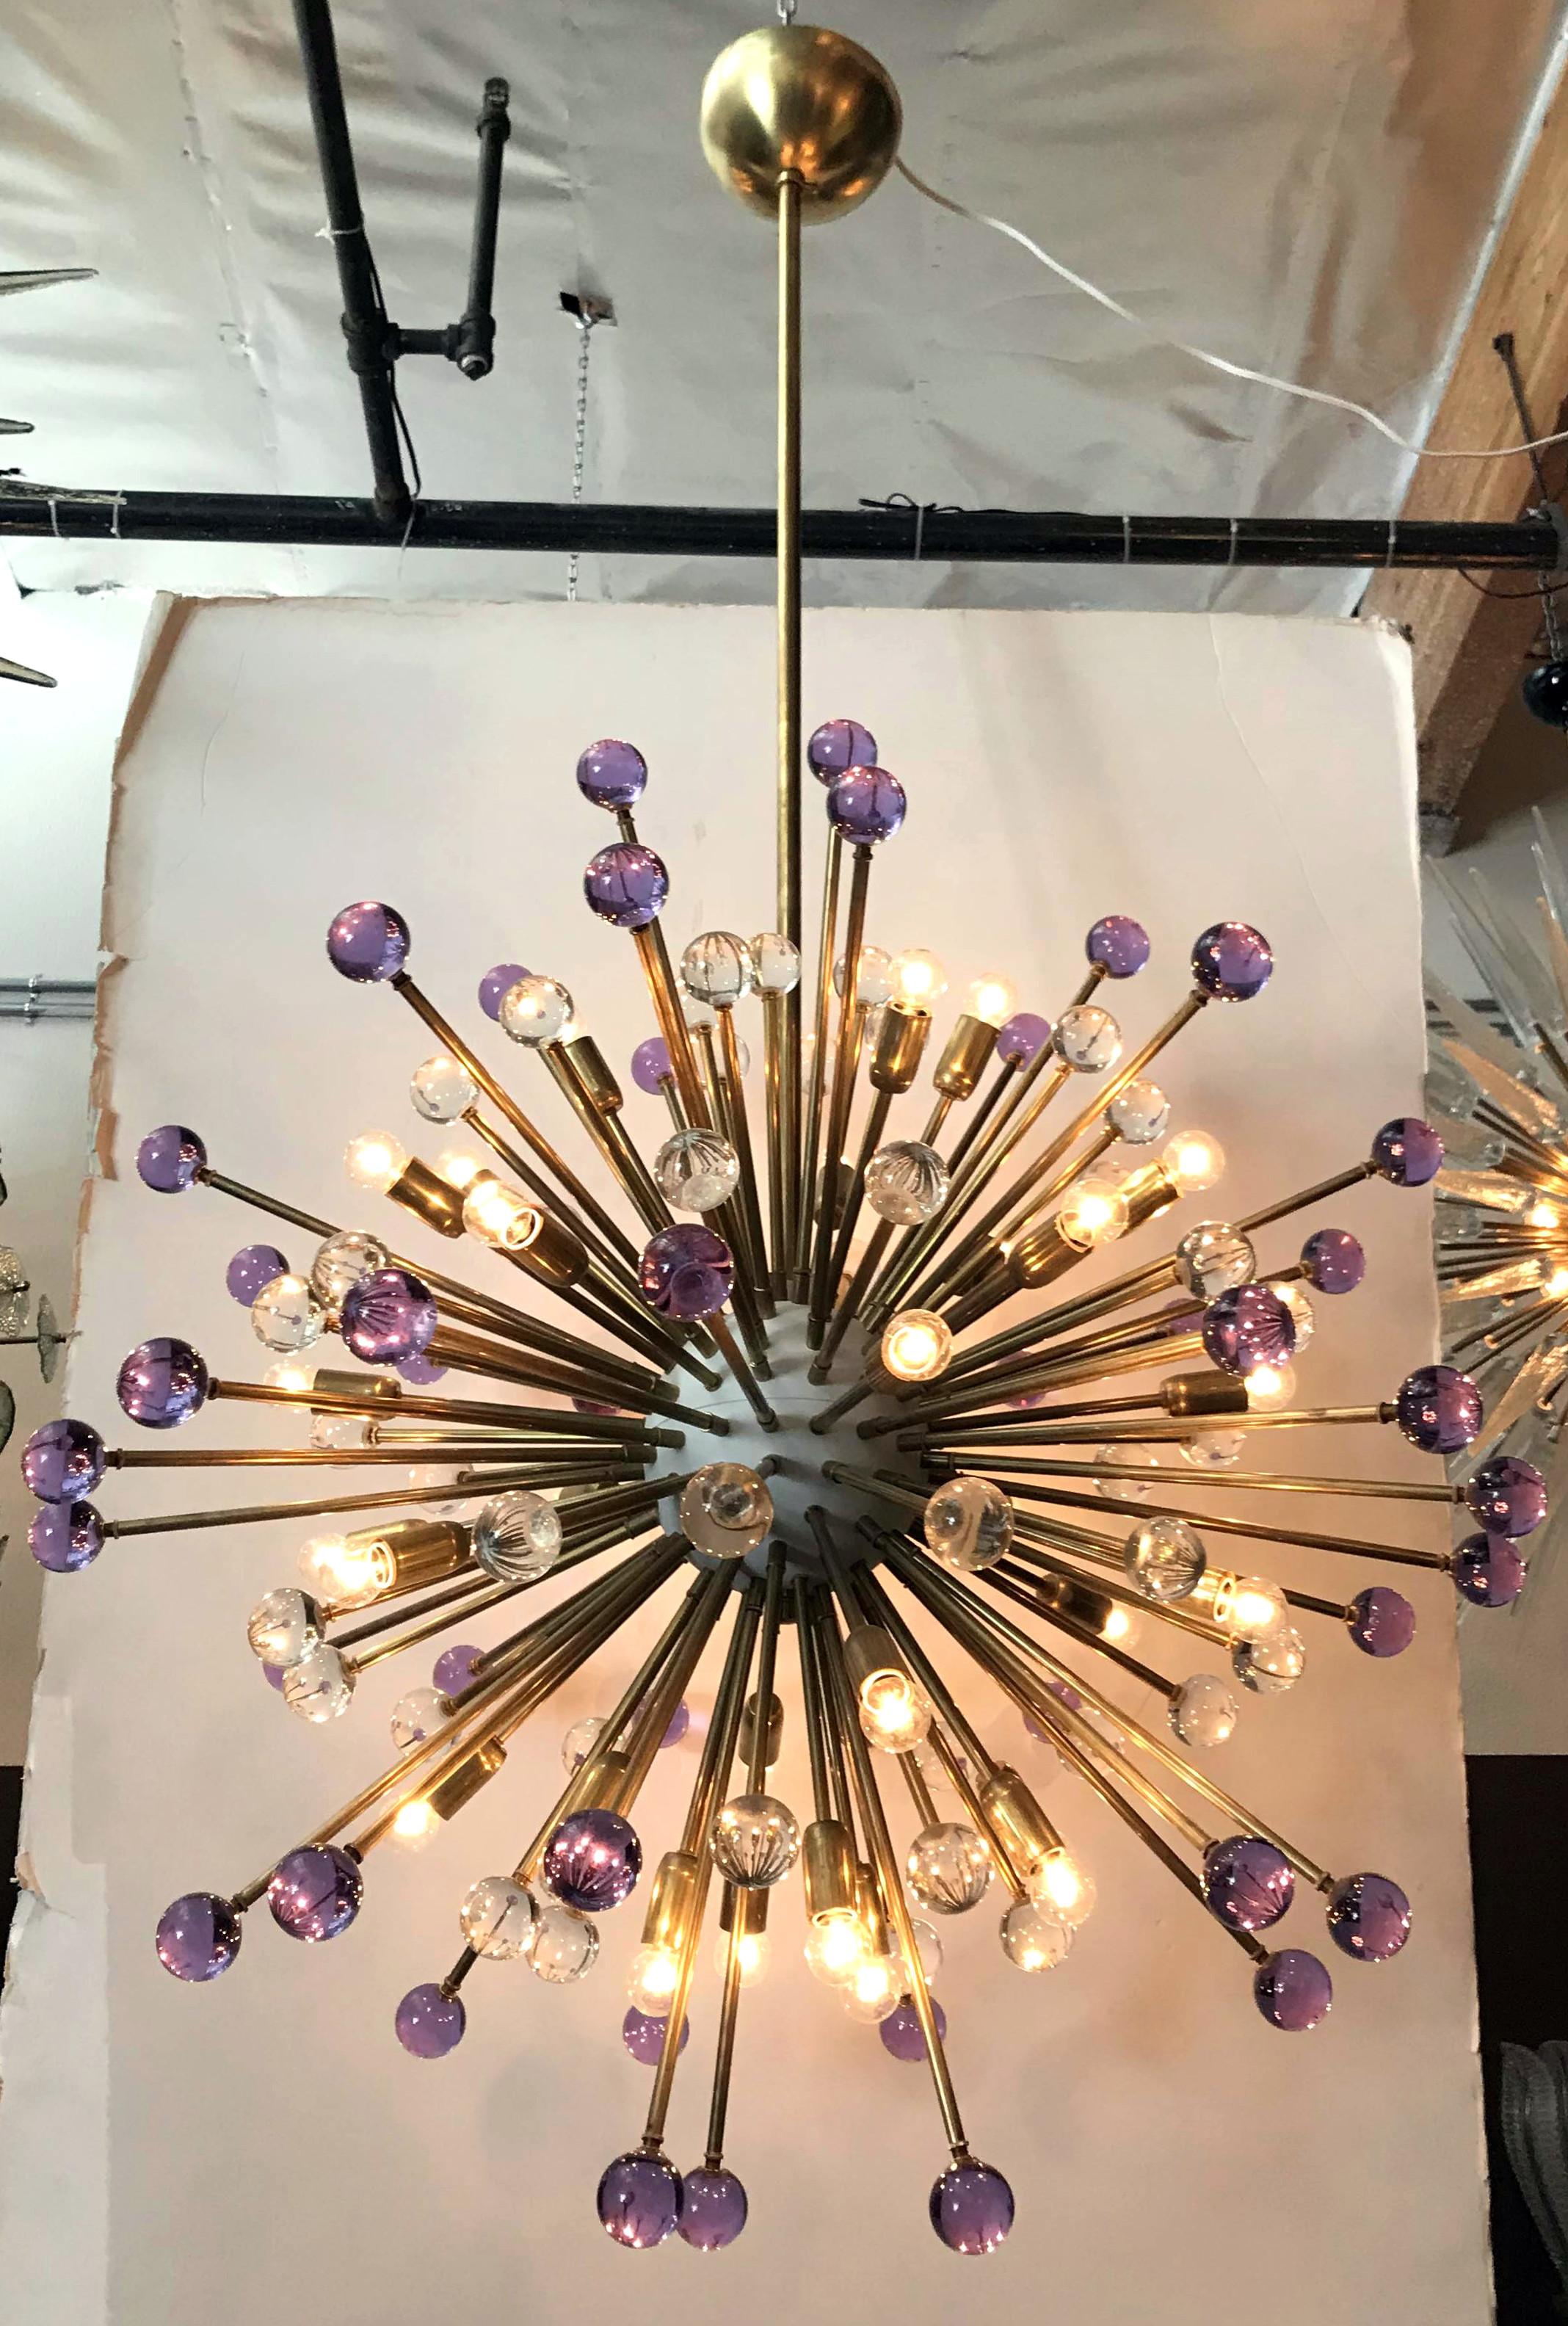 Italian modern Sputnik chandeliers with hand blown purple and clear Murano glass spheres, mounted on natural brass frames with white enameled centers / Designed by Fabio Bergomi for Fabio Ltd / Made in Italy
30 lights / E12 type / max 40W